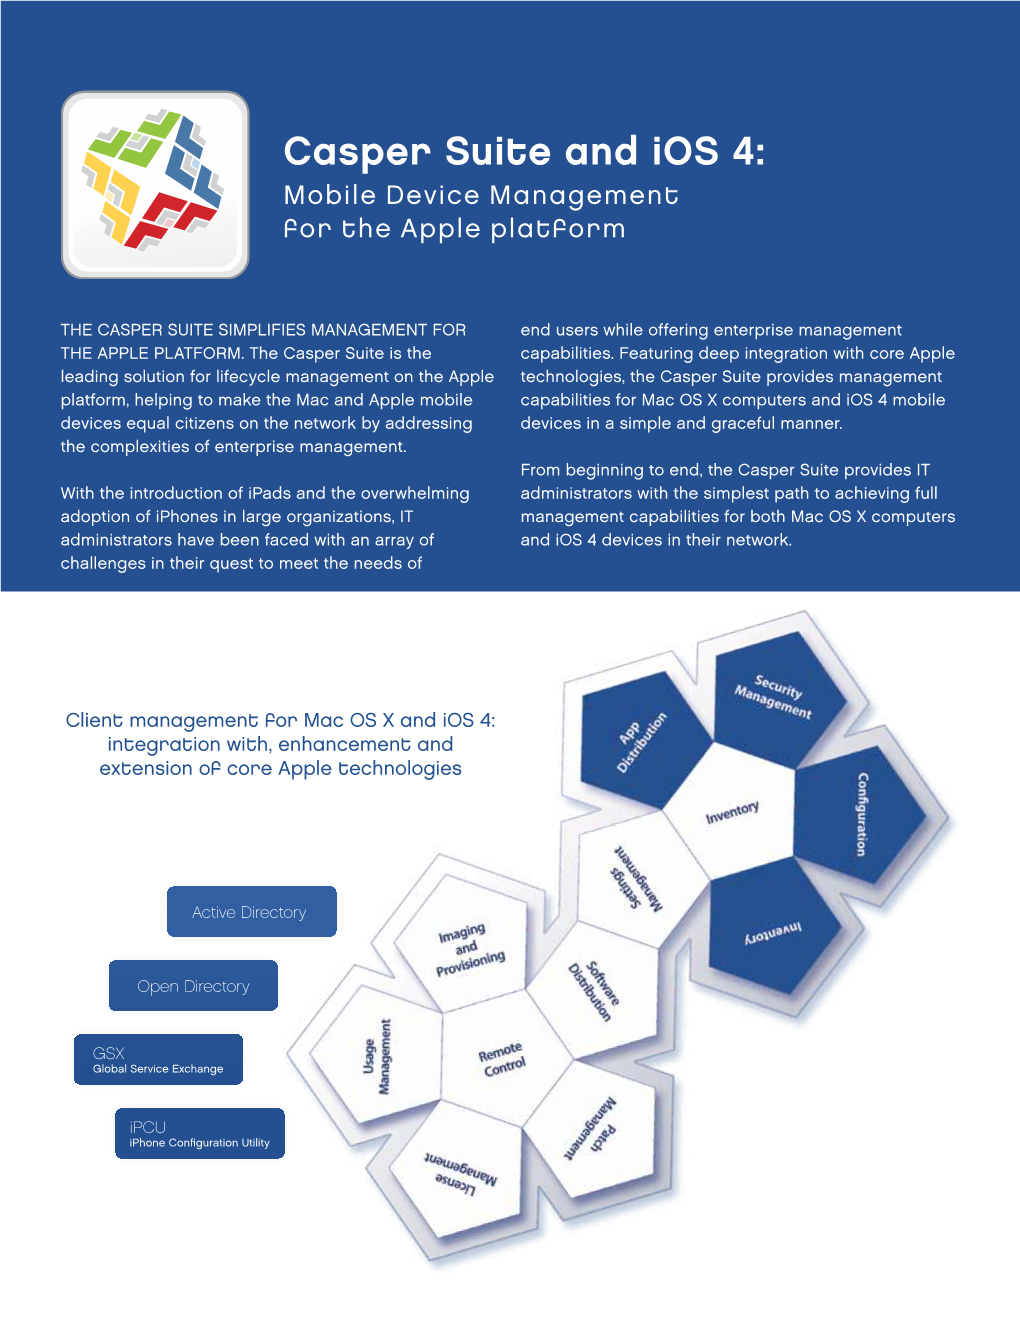 Casper Suite and Ios 4: Mobile Device Management for the Apple Platform